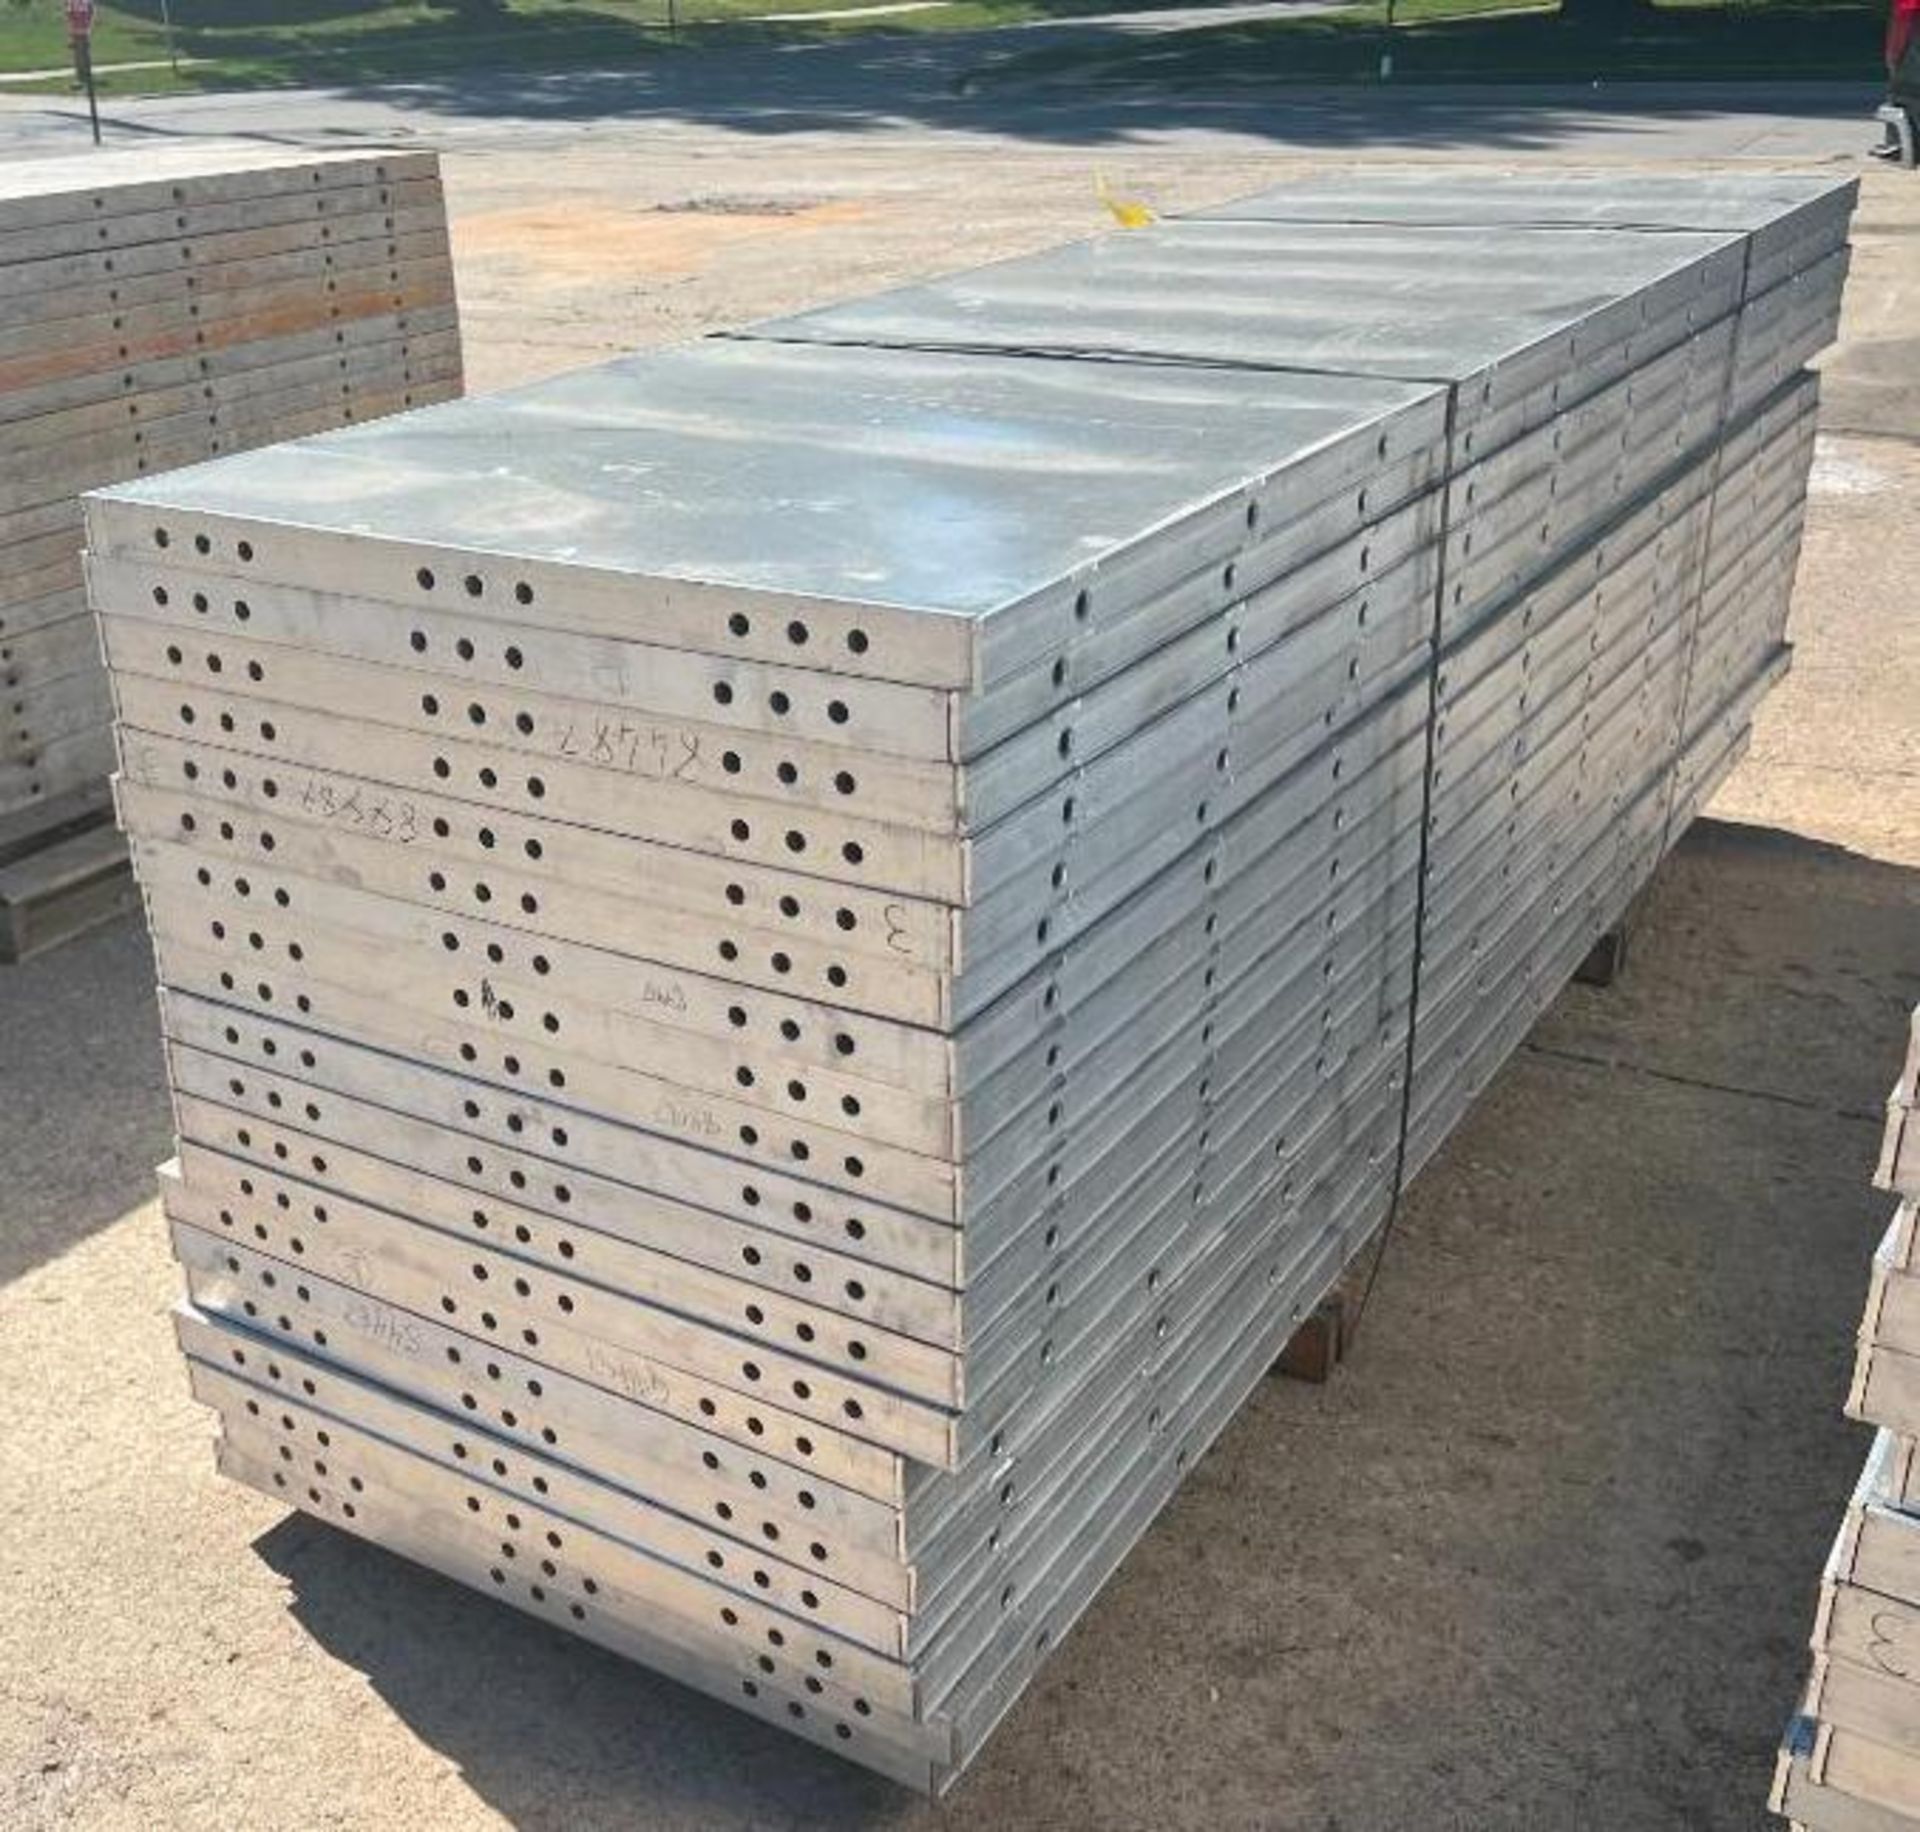 (20) NEW 3' x 10' Wall Ties Aluminum Concrete Forms, 6-12 Hole Pattern. Located in Mt. Pleasant, IA - Image 2 of 3